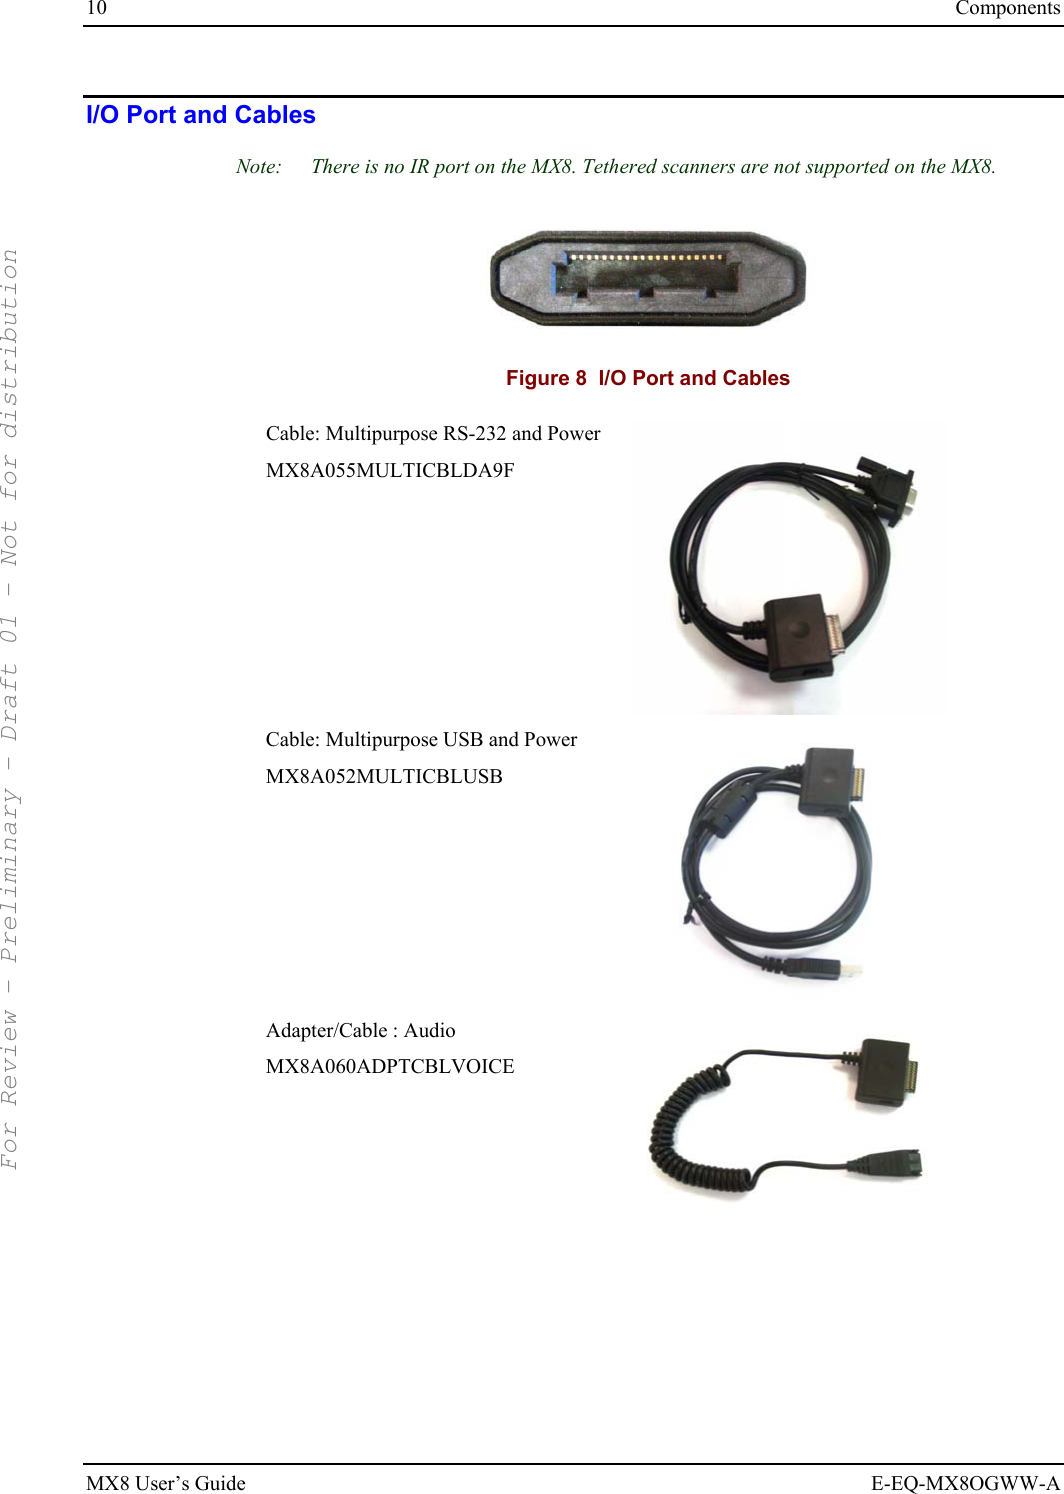 10  Components MX8 User’s Guide  E-EQ-MX8OGWW-A I/O Port and Cables Note:  There is no IR port on the MX8. Tethered scanners are not supported on the MX8.  Figure 8  I/O Port and Cables Cable: Multipurpose RS-232 and Power MX8A055MULTICBLDA9F  Cable: Multipurpose USB and Power MX8A052MULTICBLUSB  Adapter/Cable : Audio MX8A060ADPTCBLVOICE   For Review - Preliminary - Draft 01 - Not for distribution 